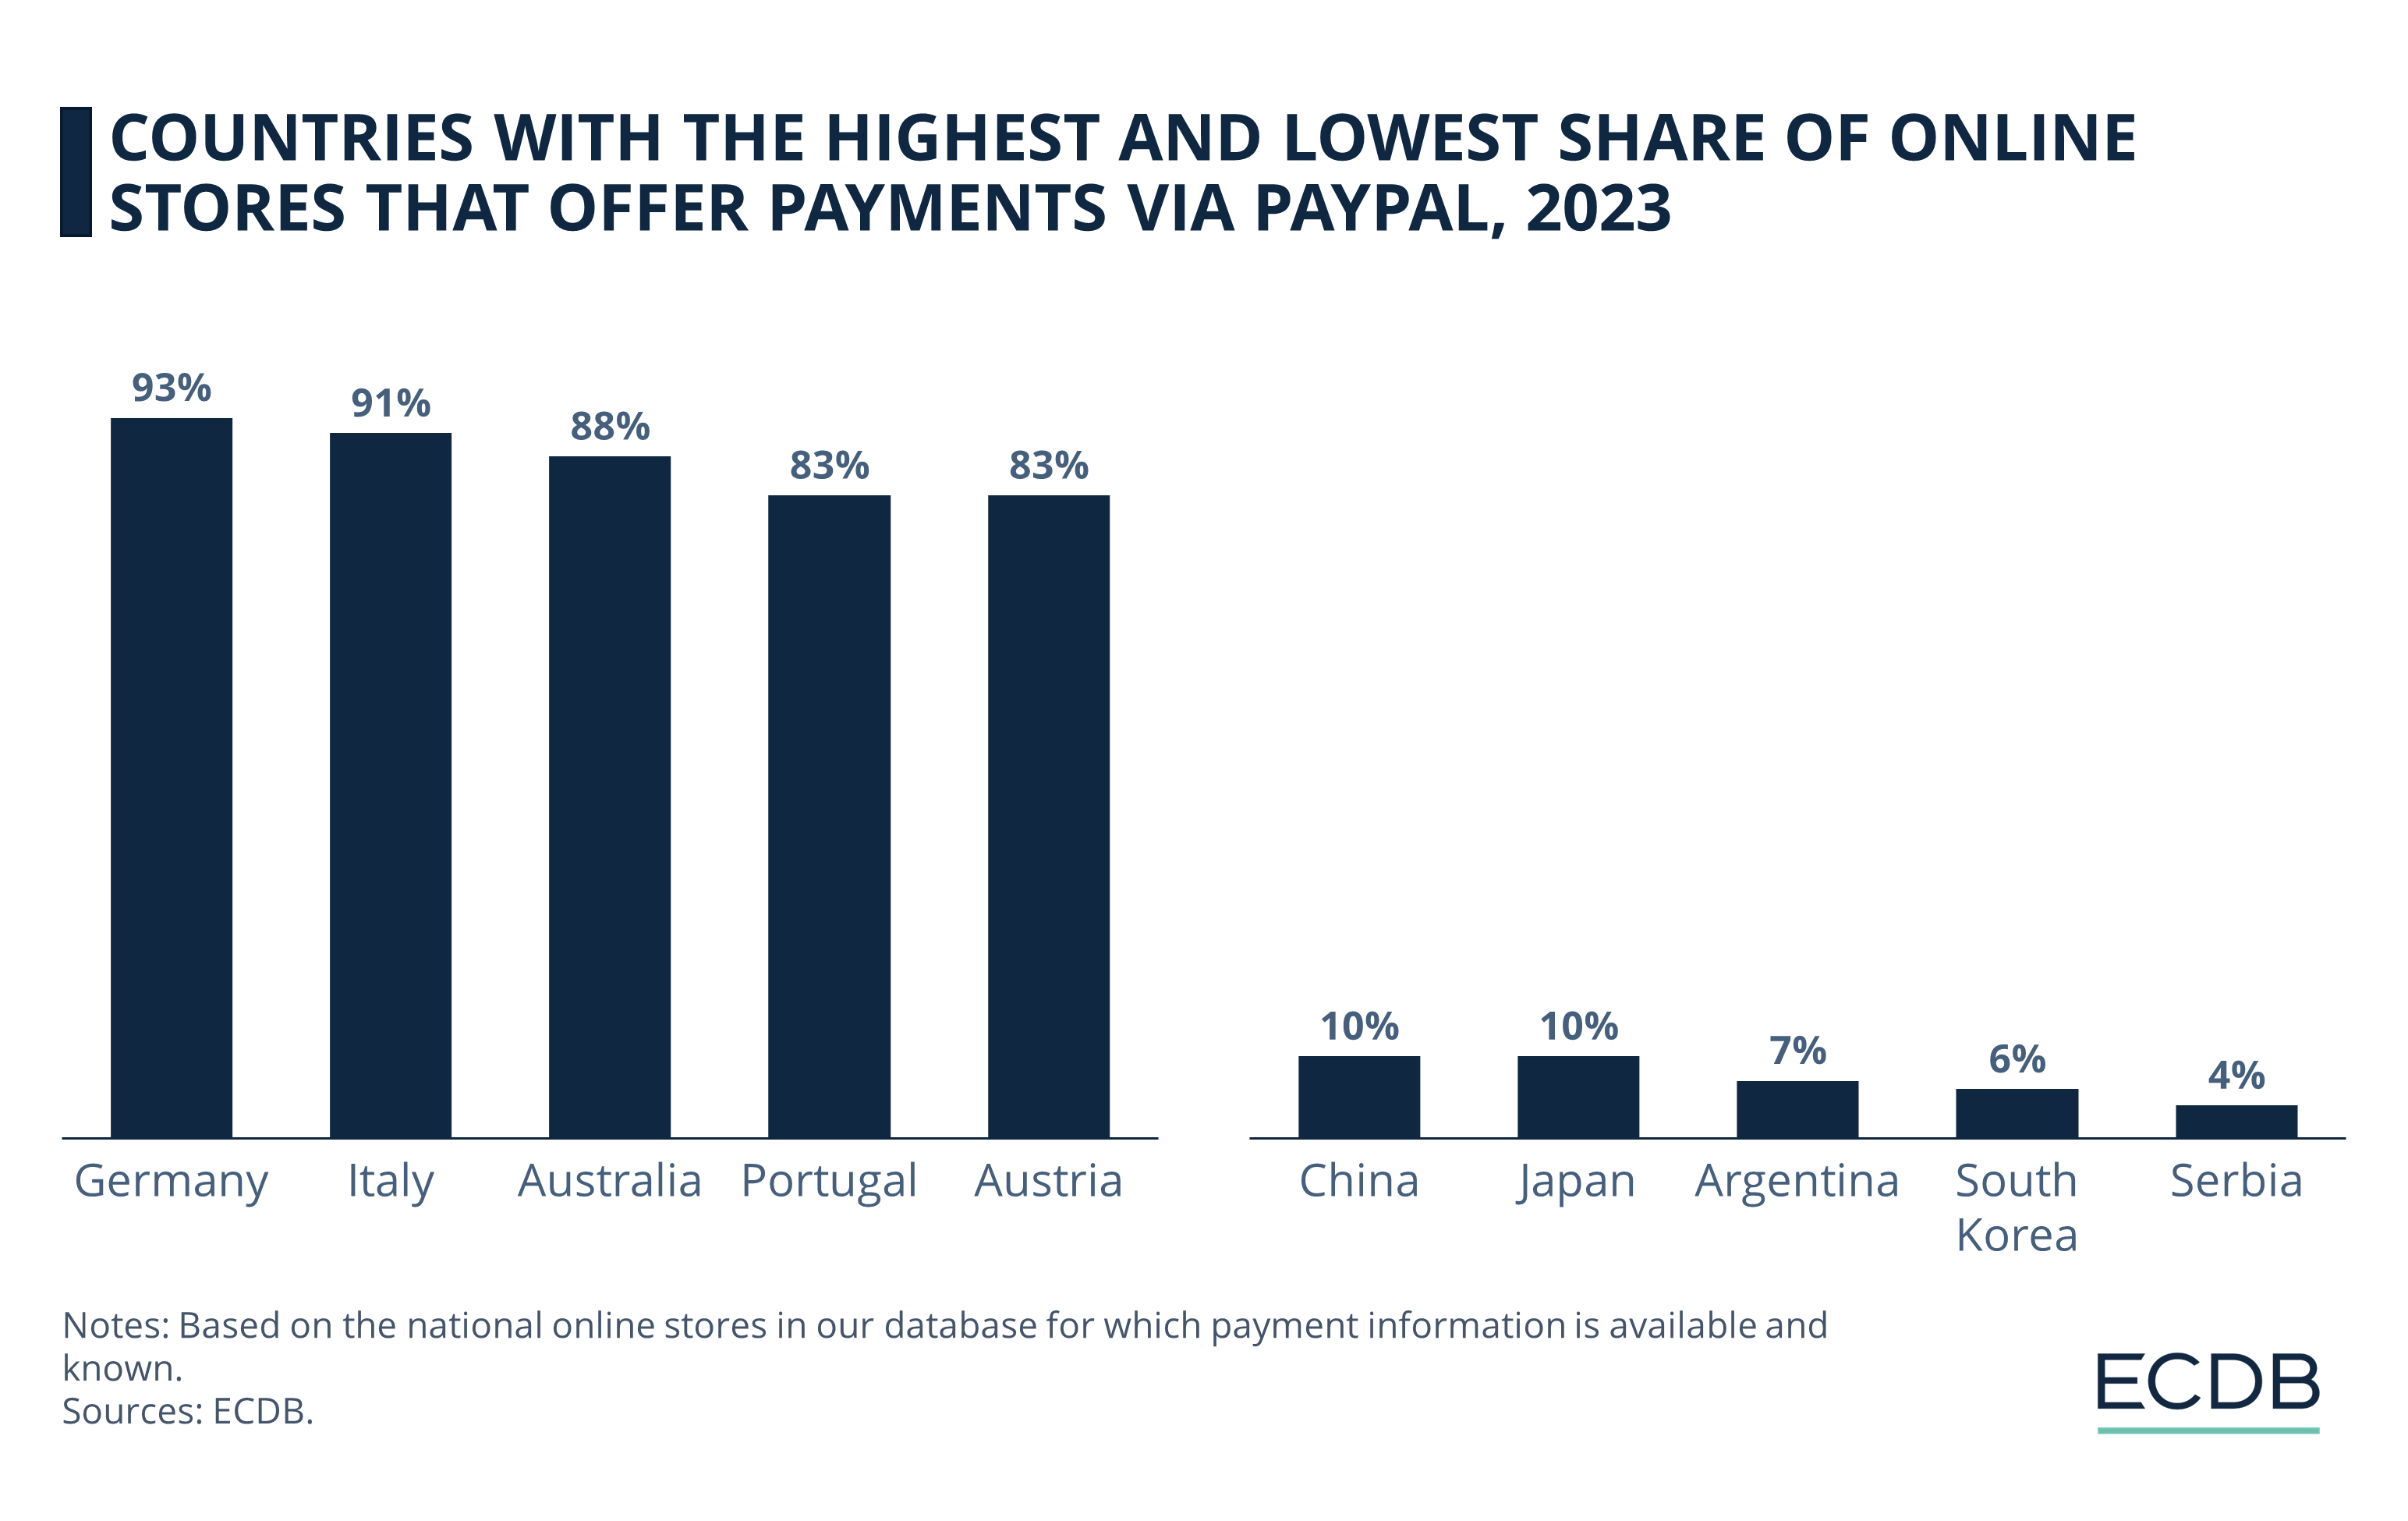 Countries with the Highest and Lowest Share of Online Stores That Offer Payments via PayPal, 2023